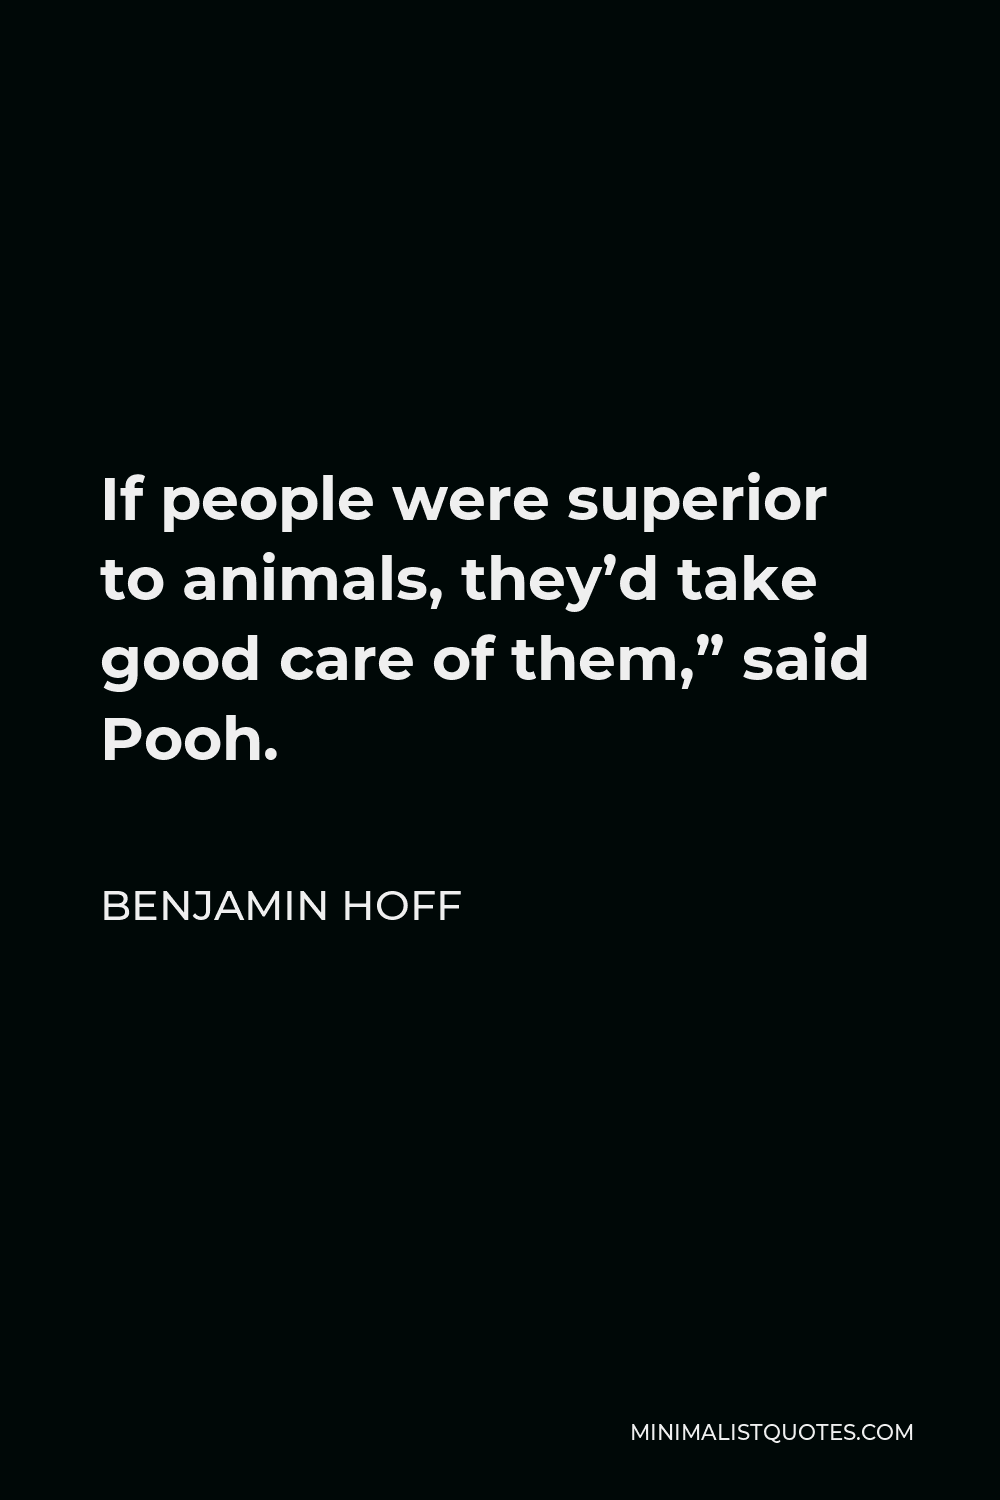 Benjamin Hoff Quote - If people were superior to animals, they’d take good care of them,” said Pooh.